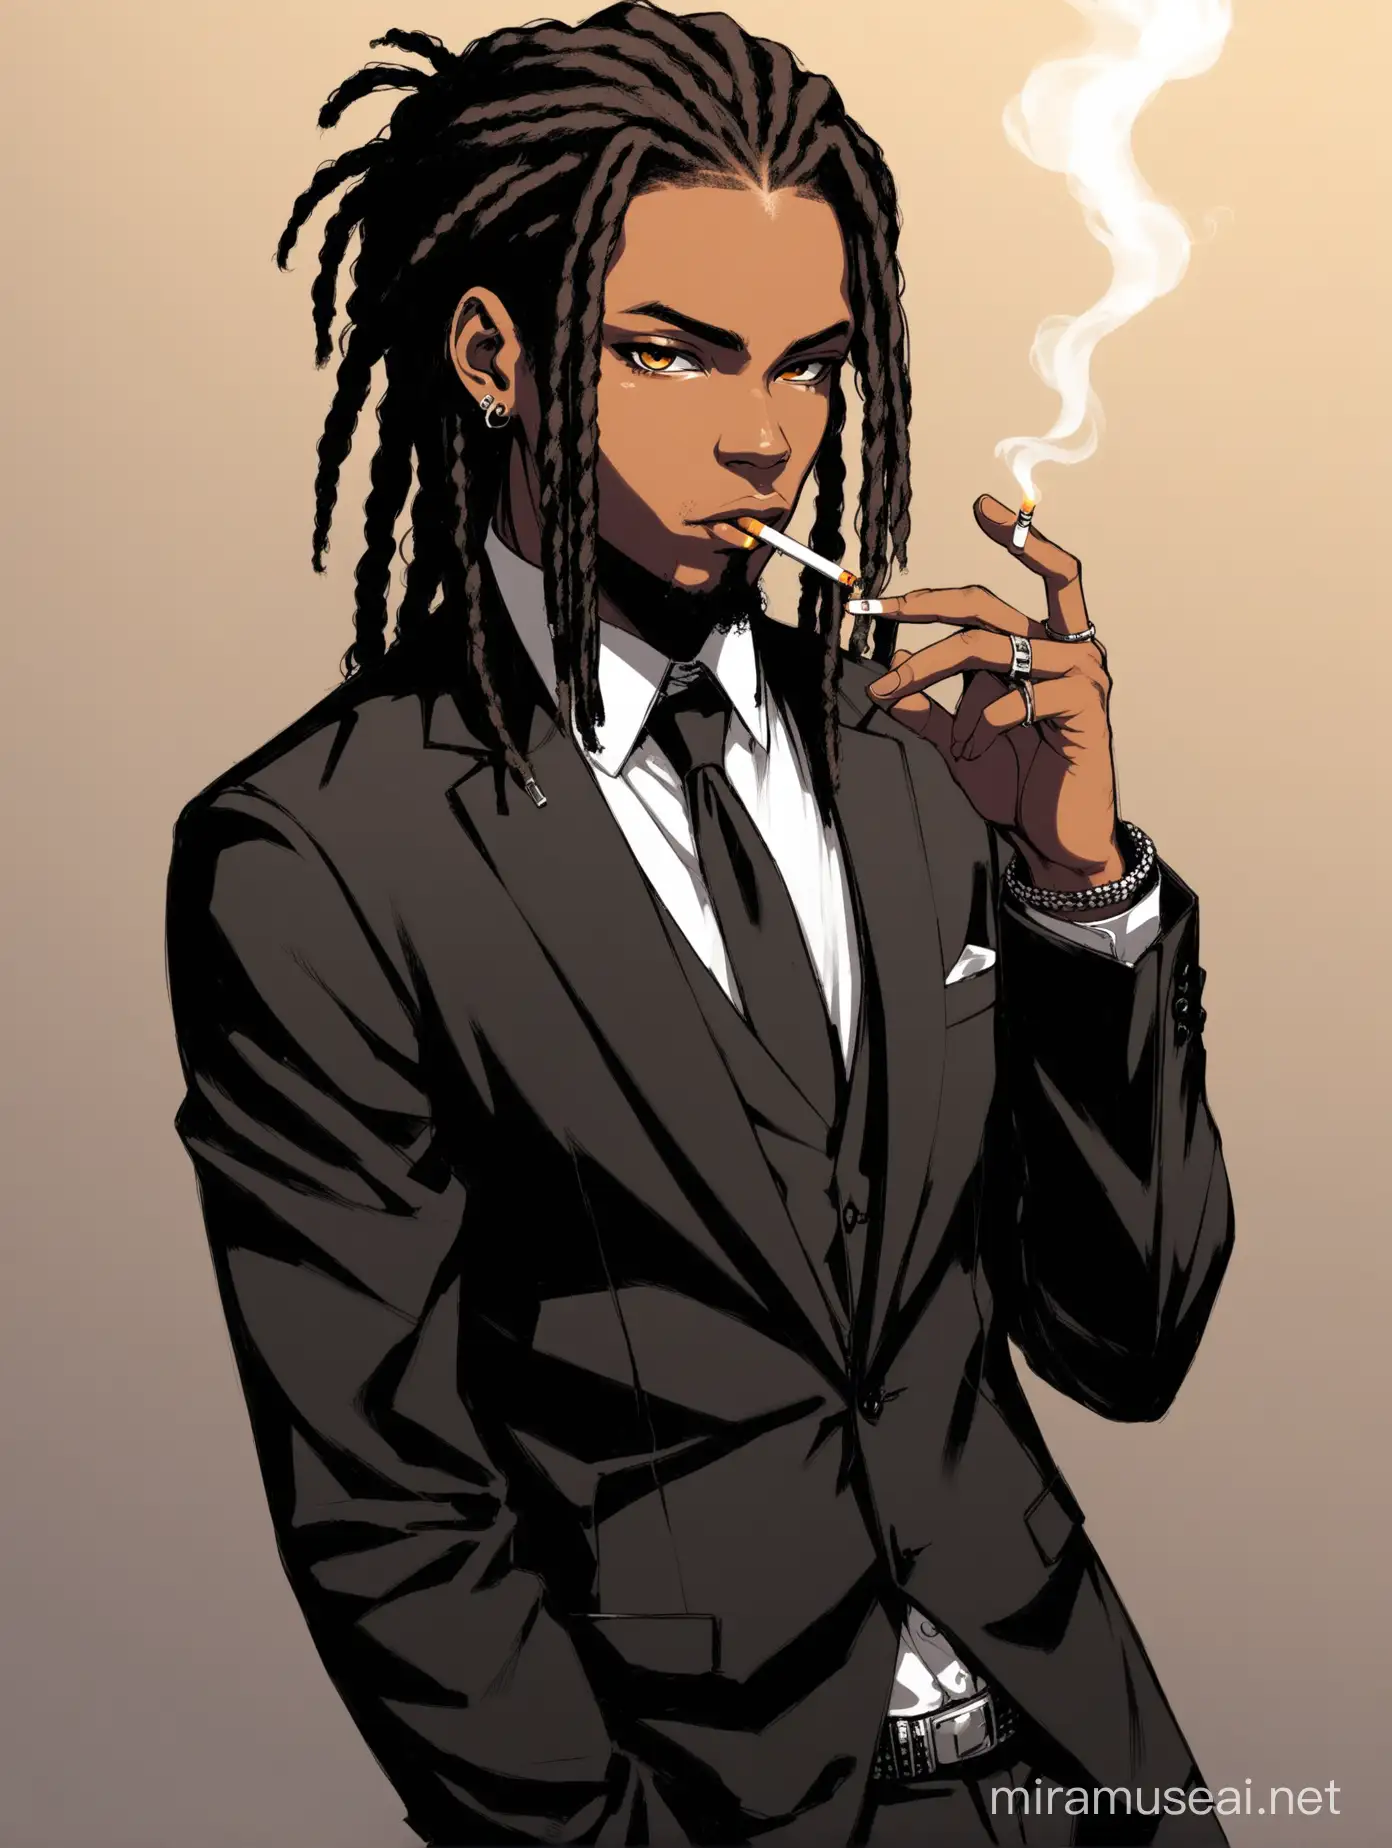 young male Melanesian gangstar with dreadlocks smoking cigarette while wearing a black suit while